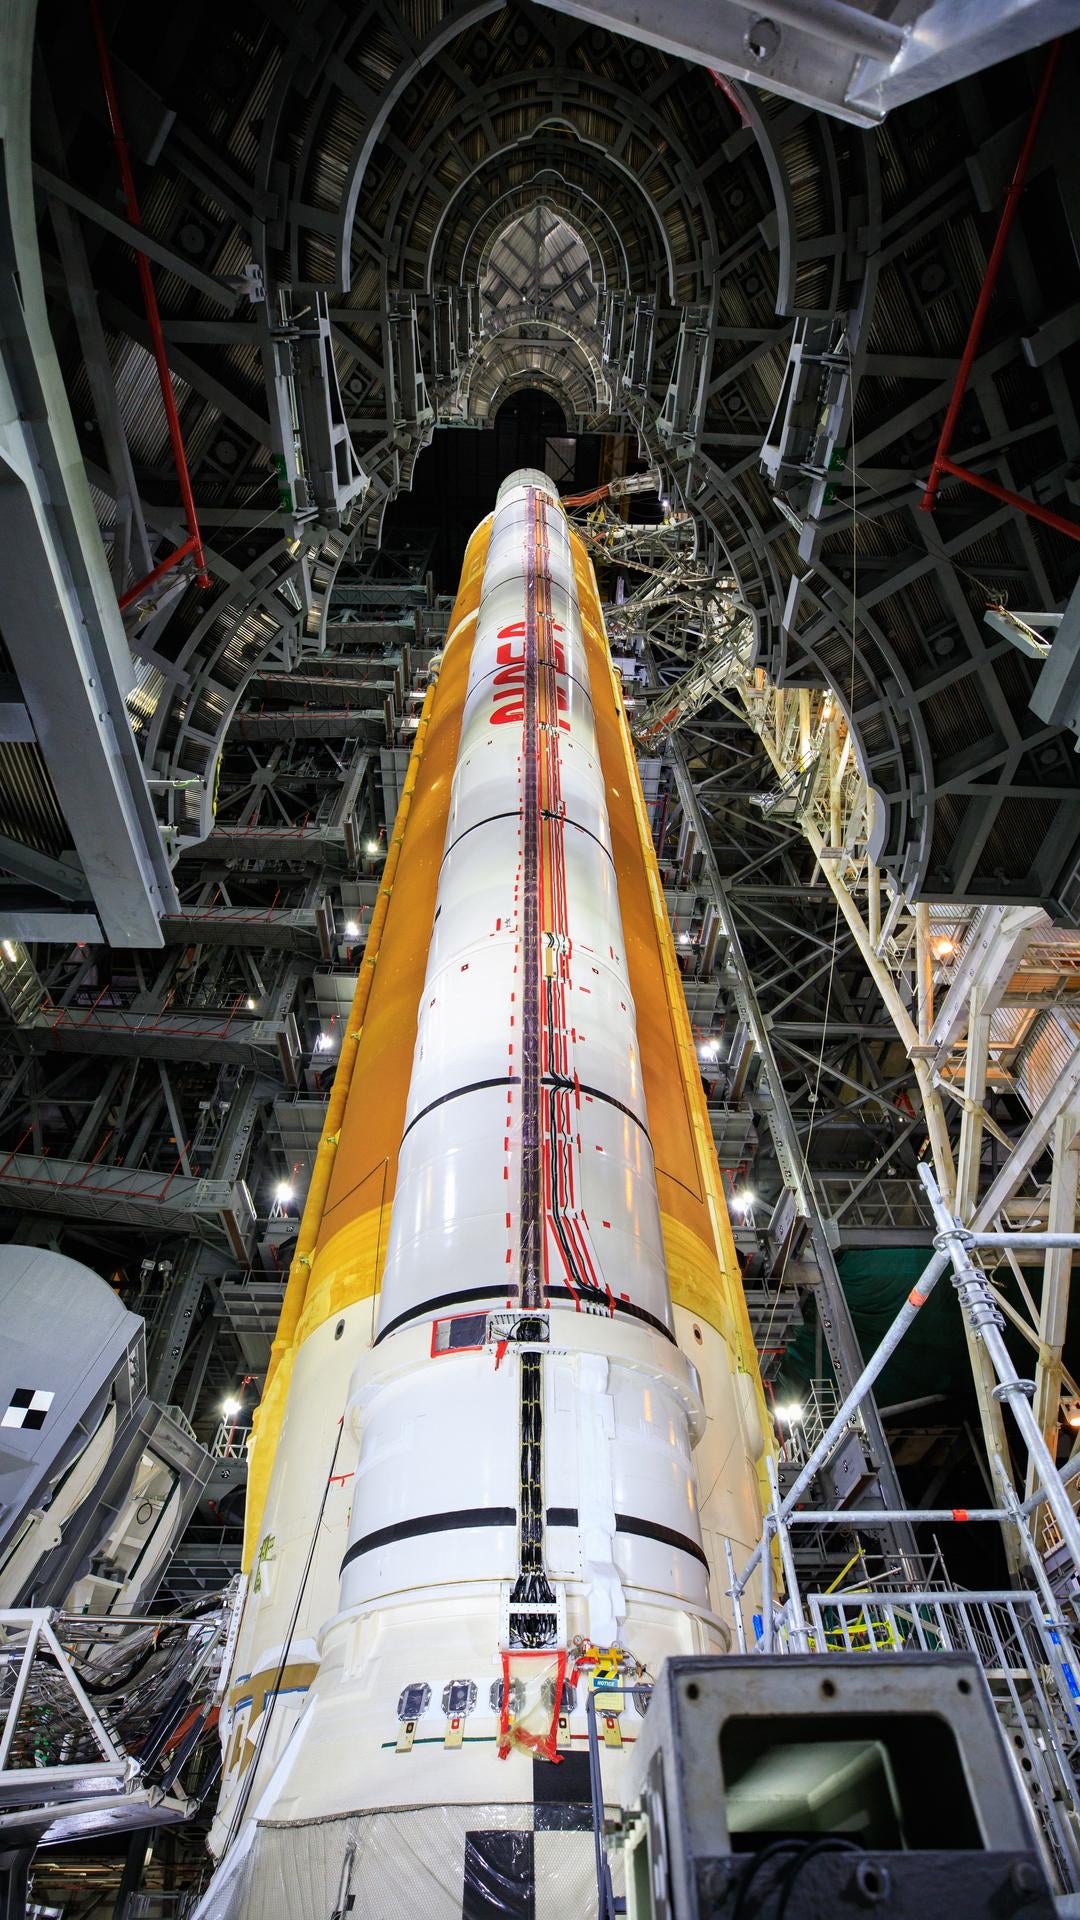 The SLS rocket inside the Vehicle Assembly Building at NASA's Kennedy Space Centre in Florida. (Photo: NASA/Frank Michaux)